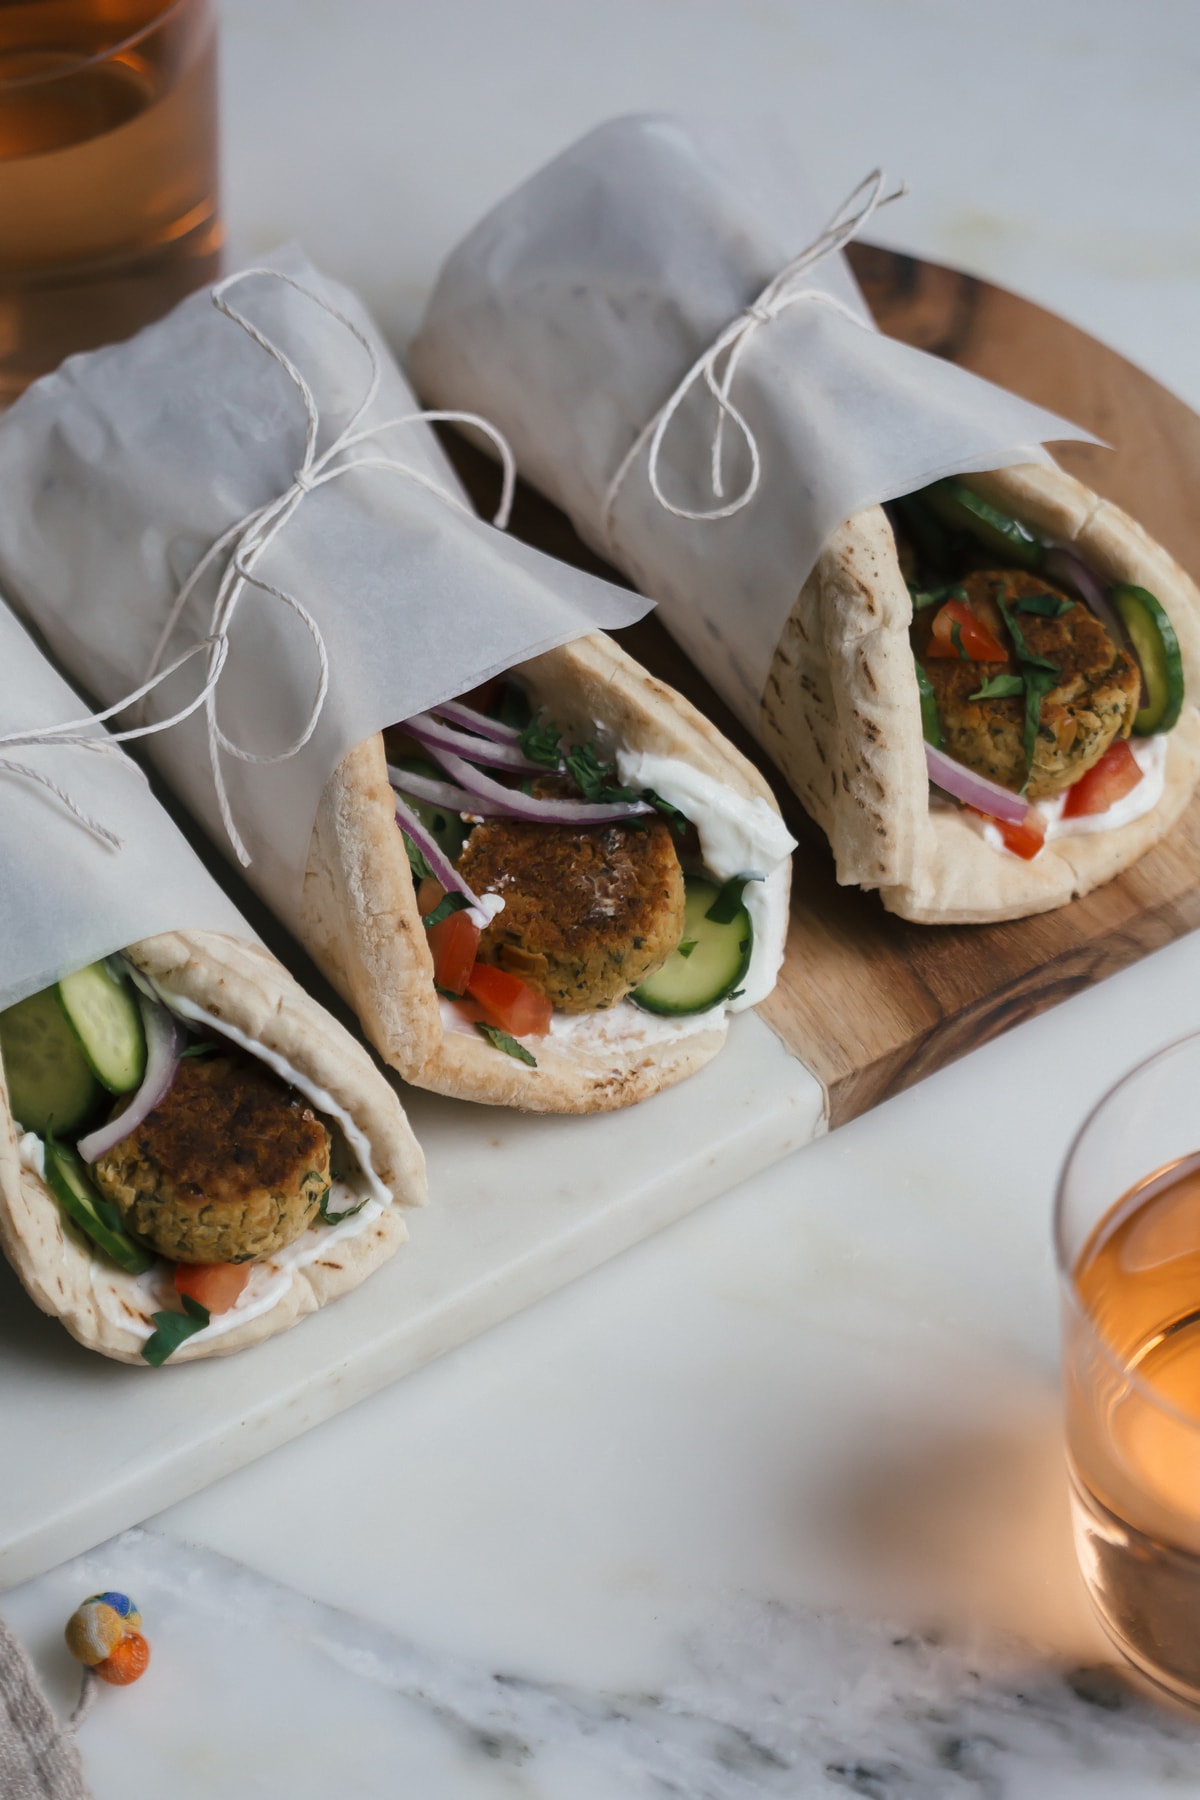 Baked Falafel Wraps with Garlic-y Labneh and Lots of Herbs